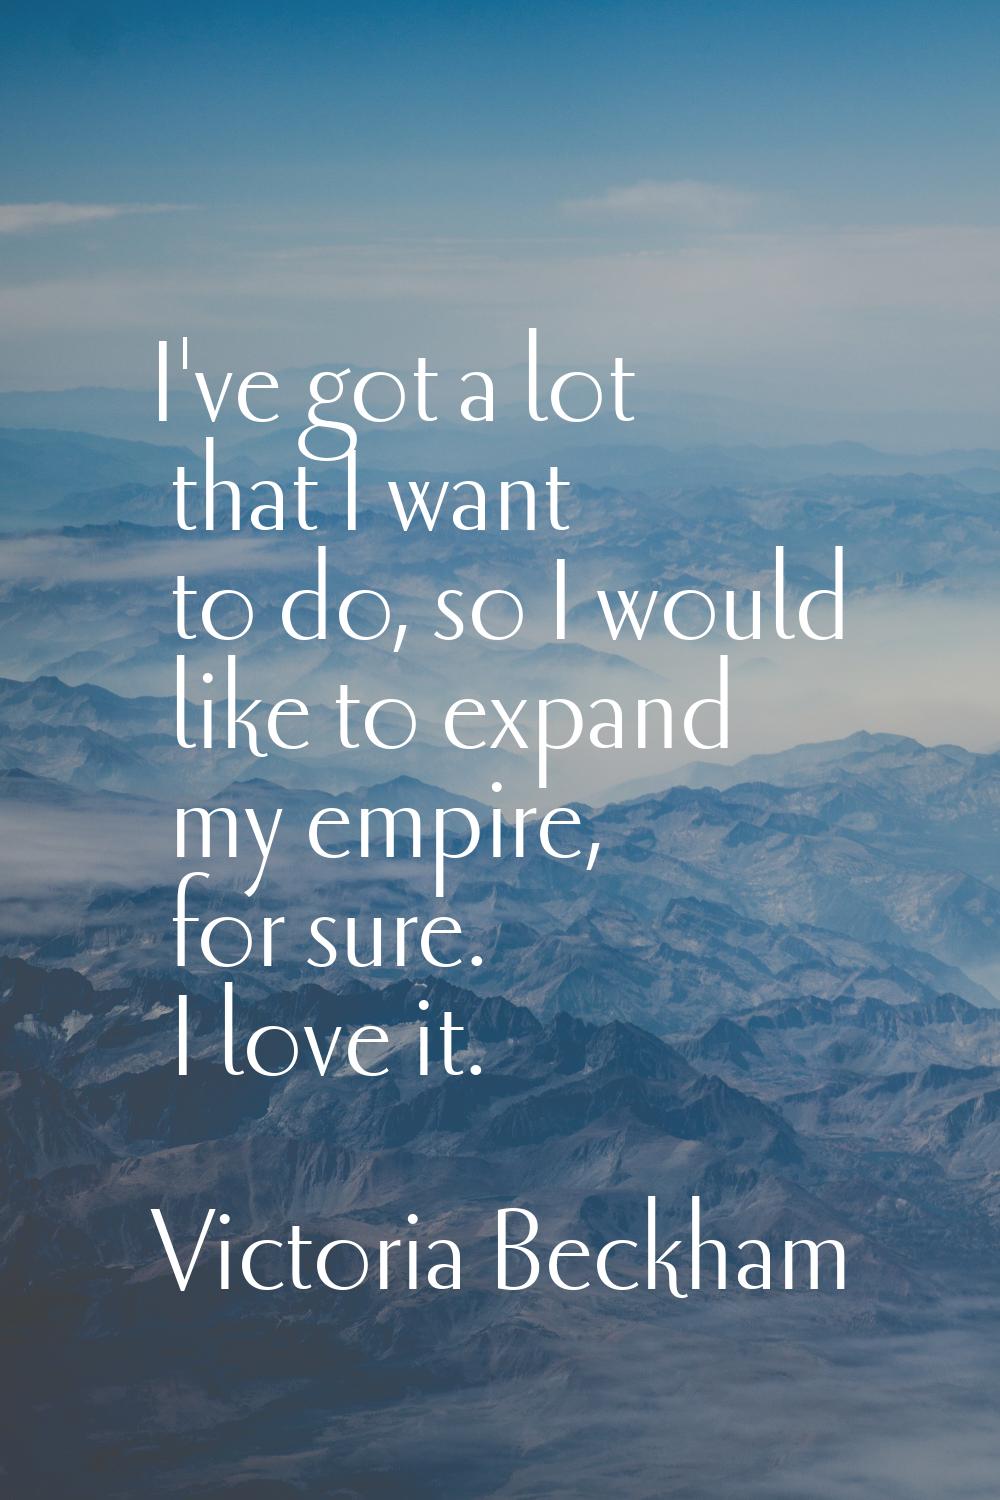 I've got a lot that I want to do, so I would like to expand my empire, for sure. I love it.